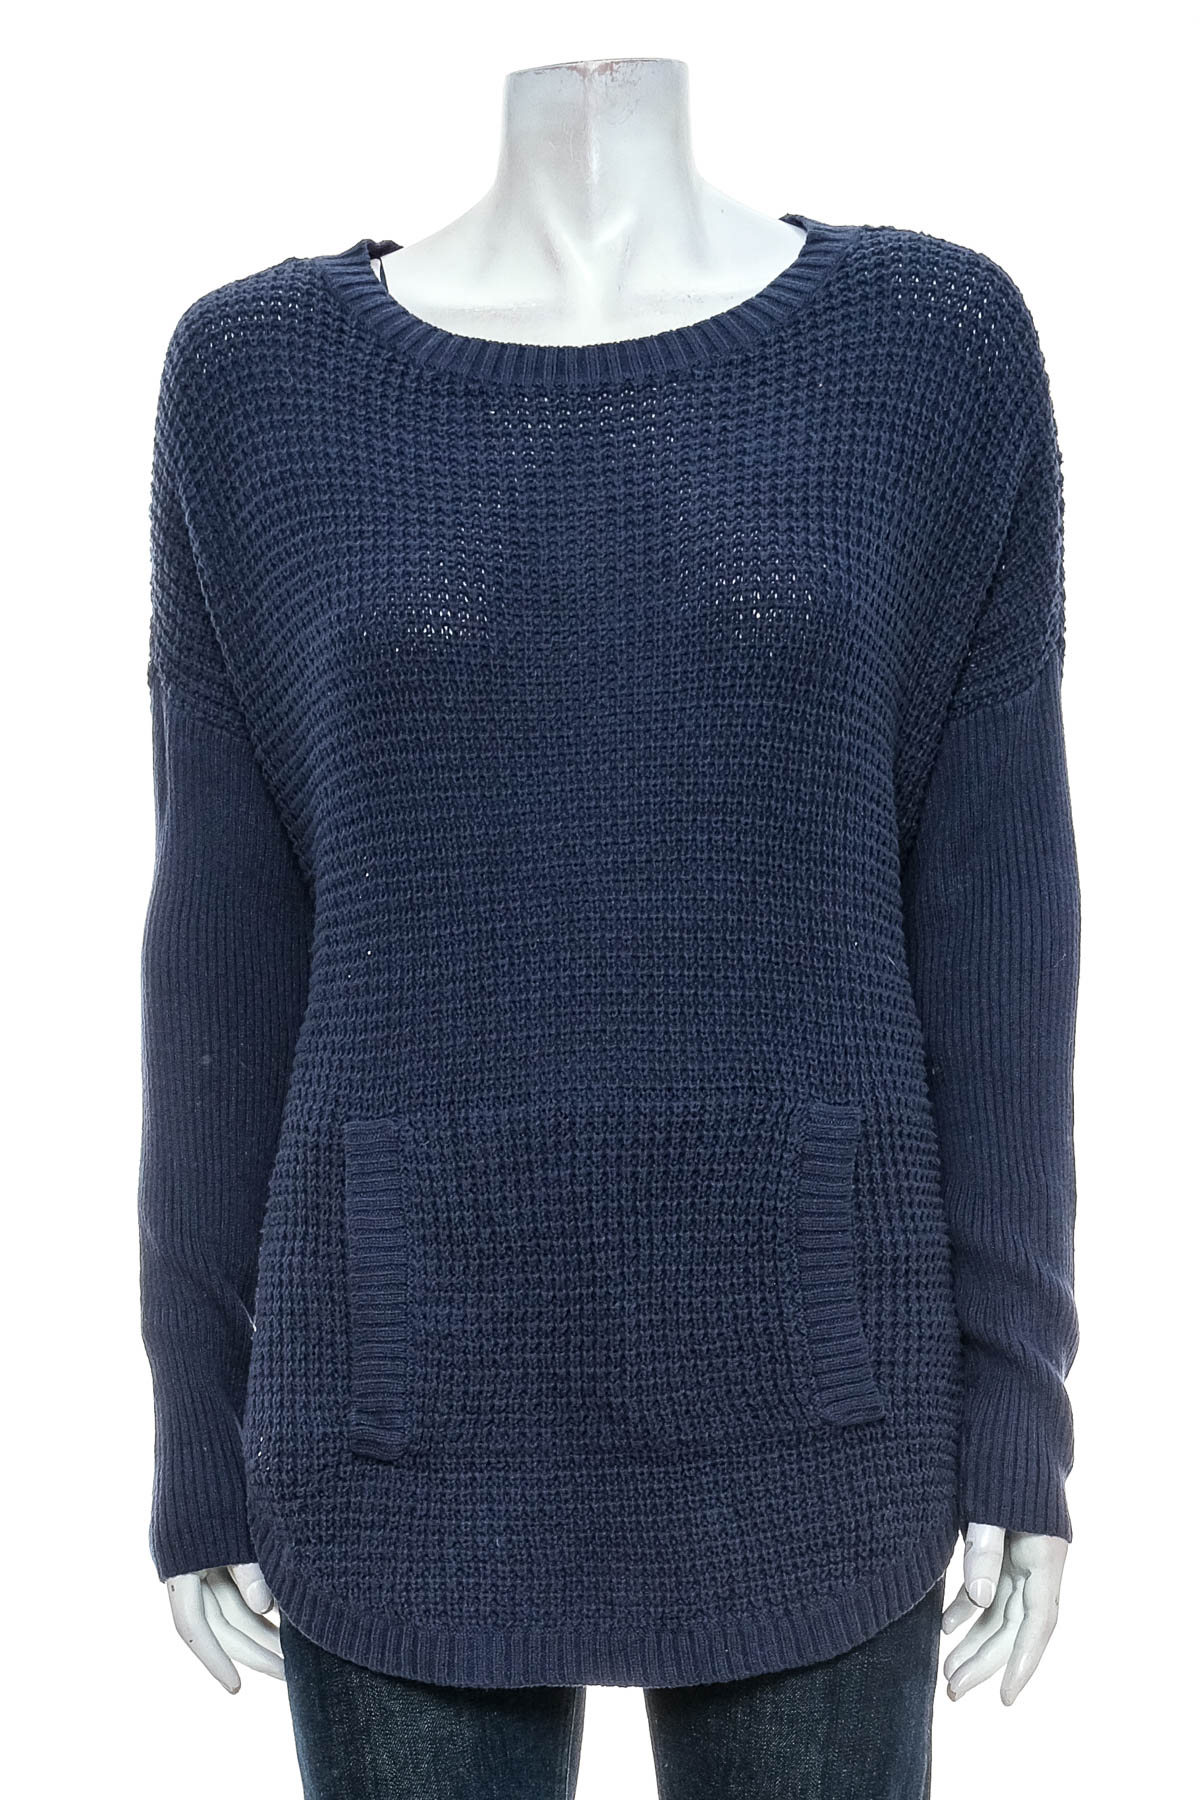 Women's sweater - VINCE CAMUTO - 0